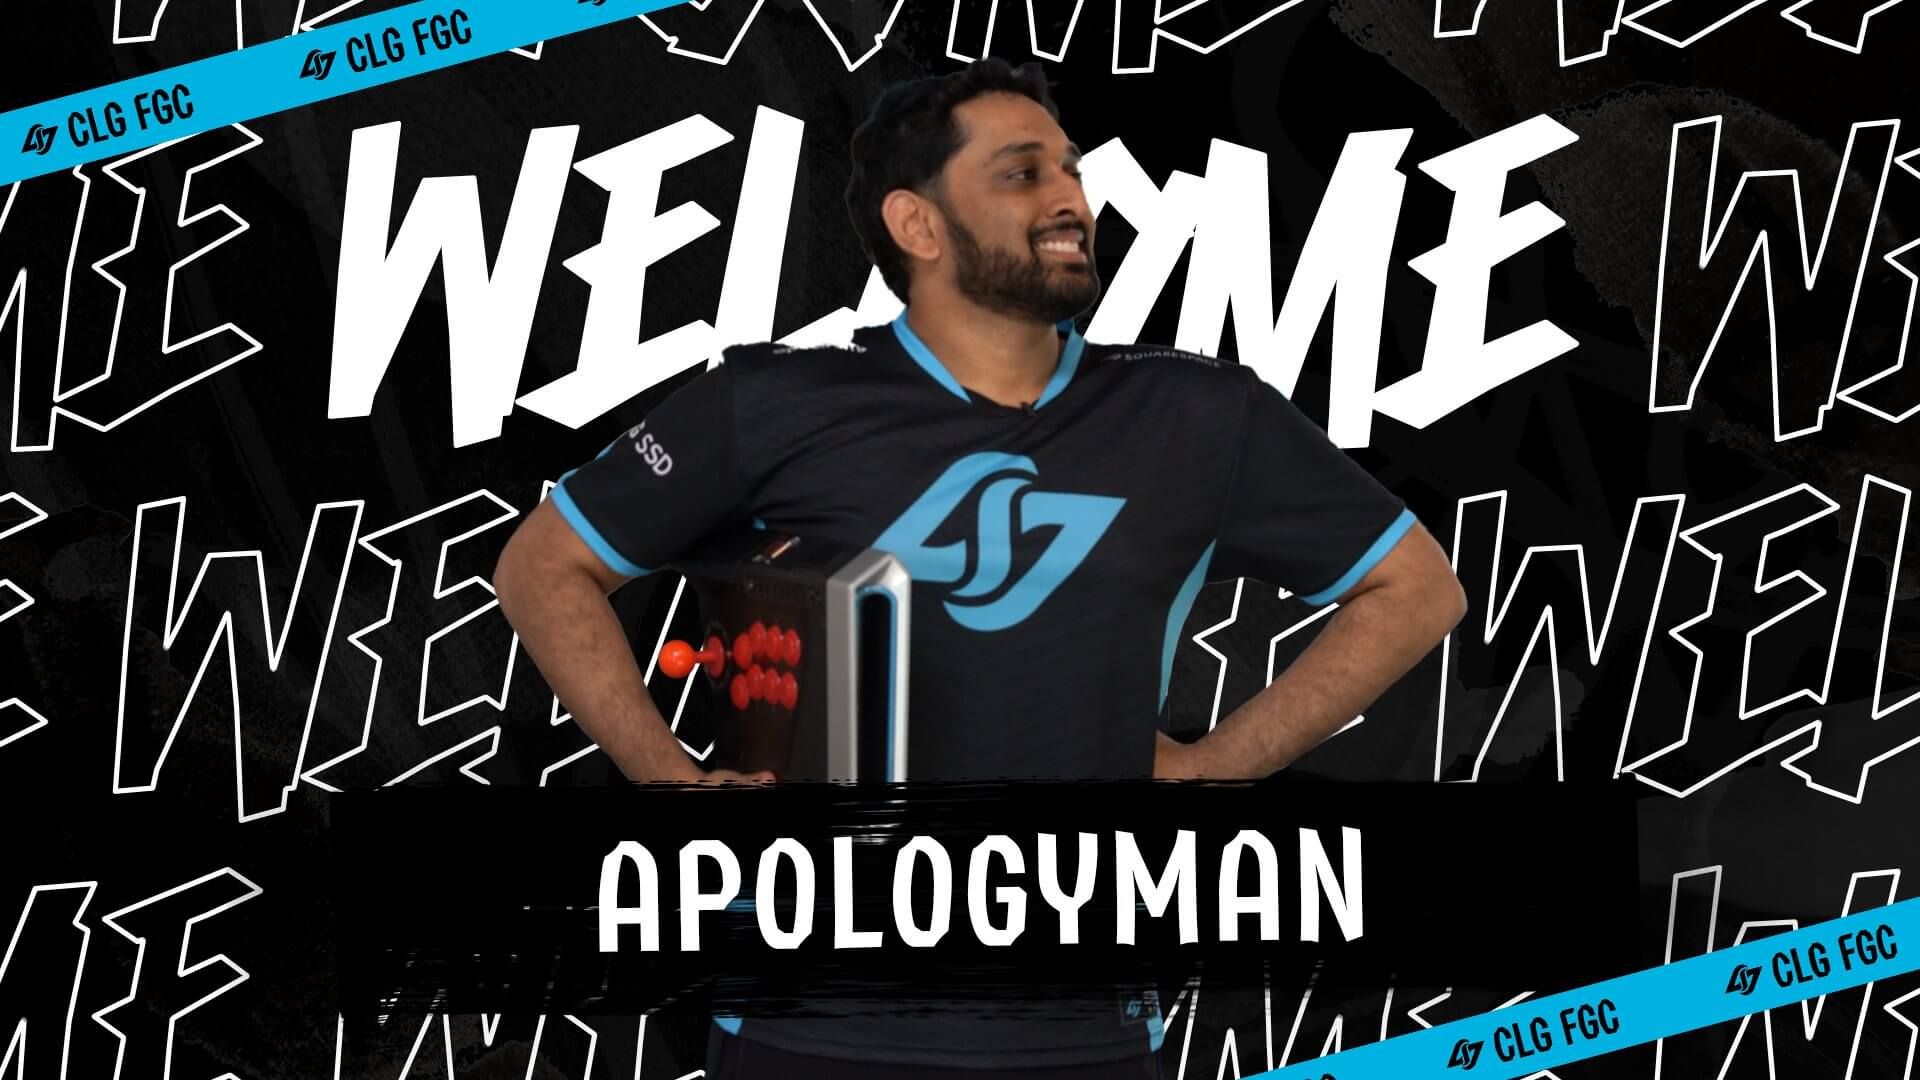 ApologyMan joins CGL's Fighting Games roster